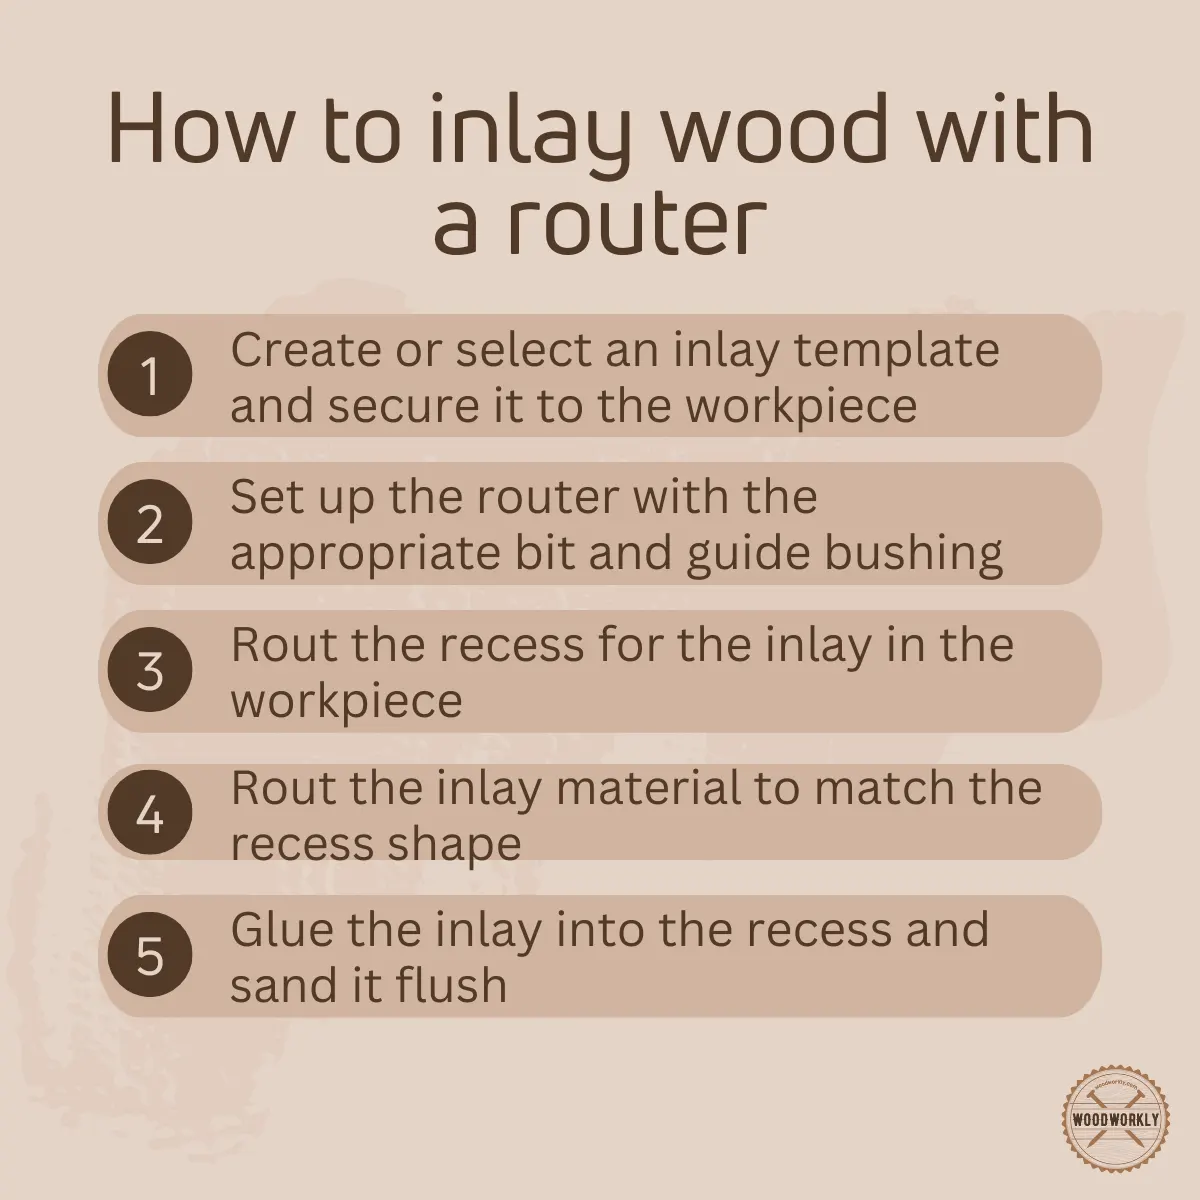 How to inlay wood with a router